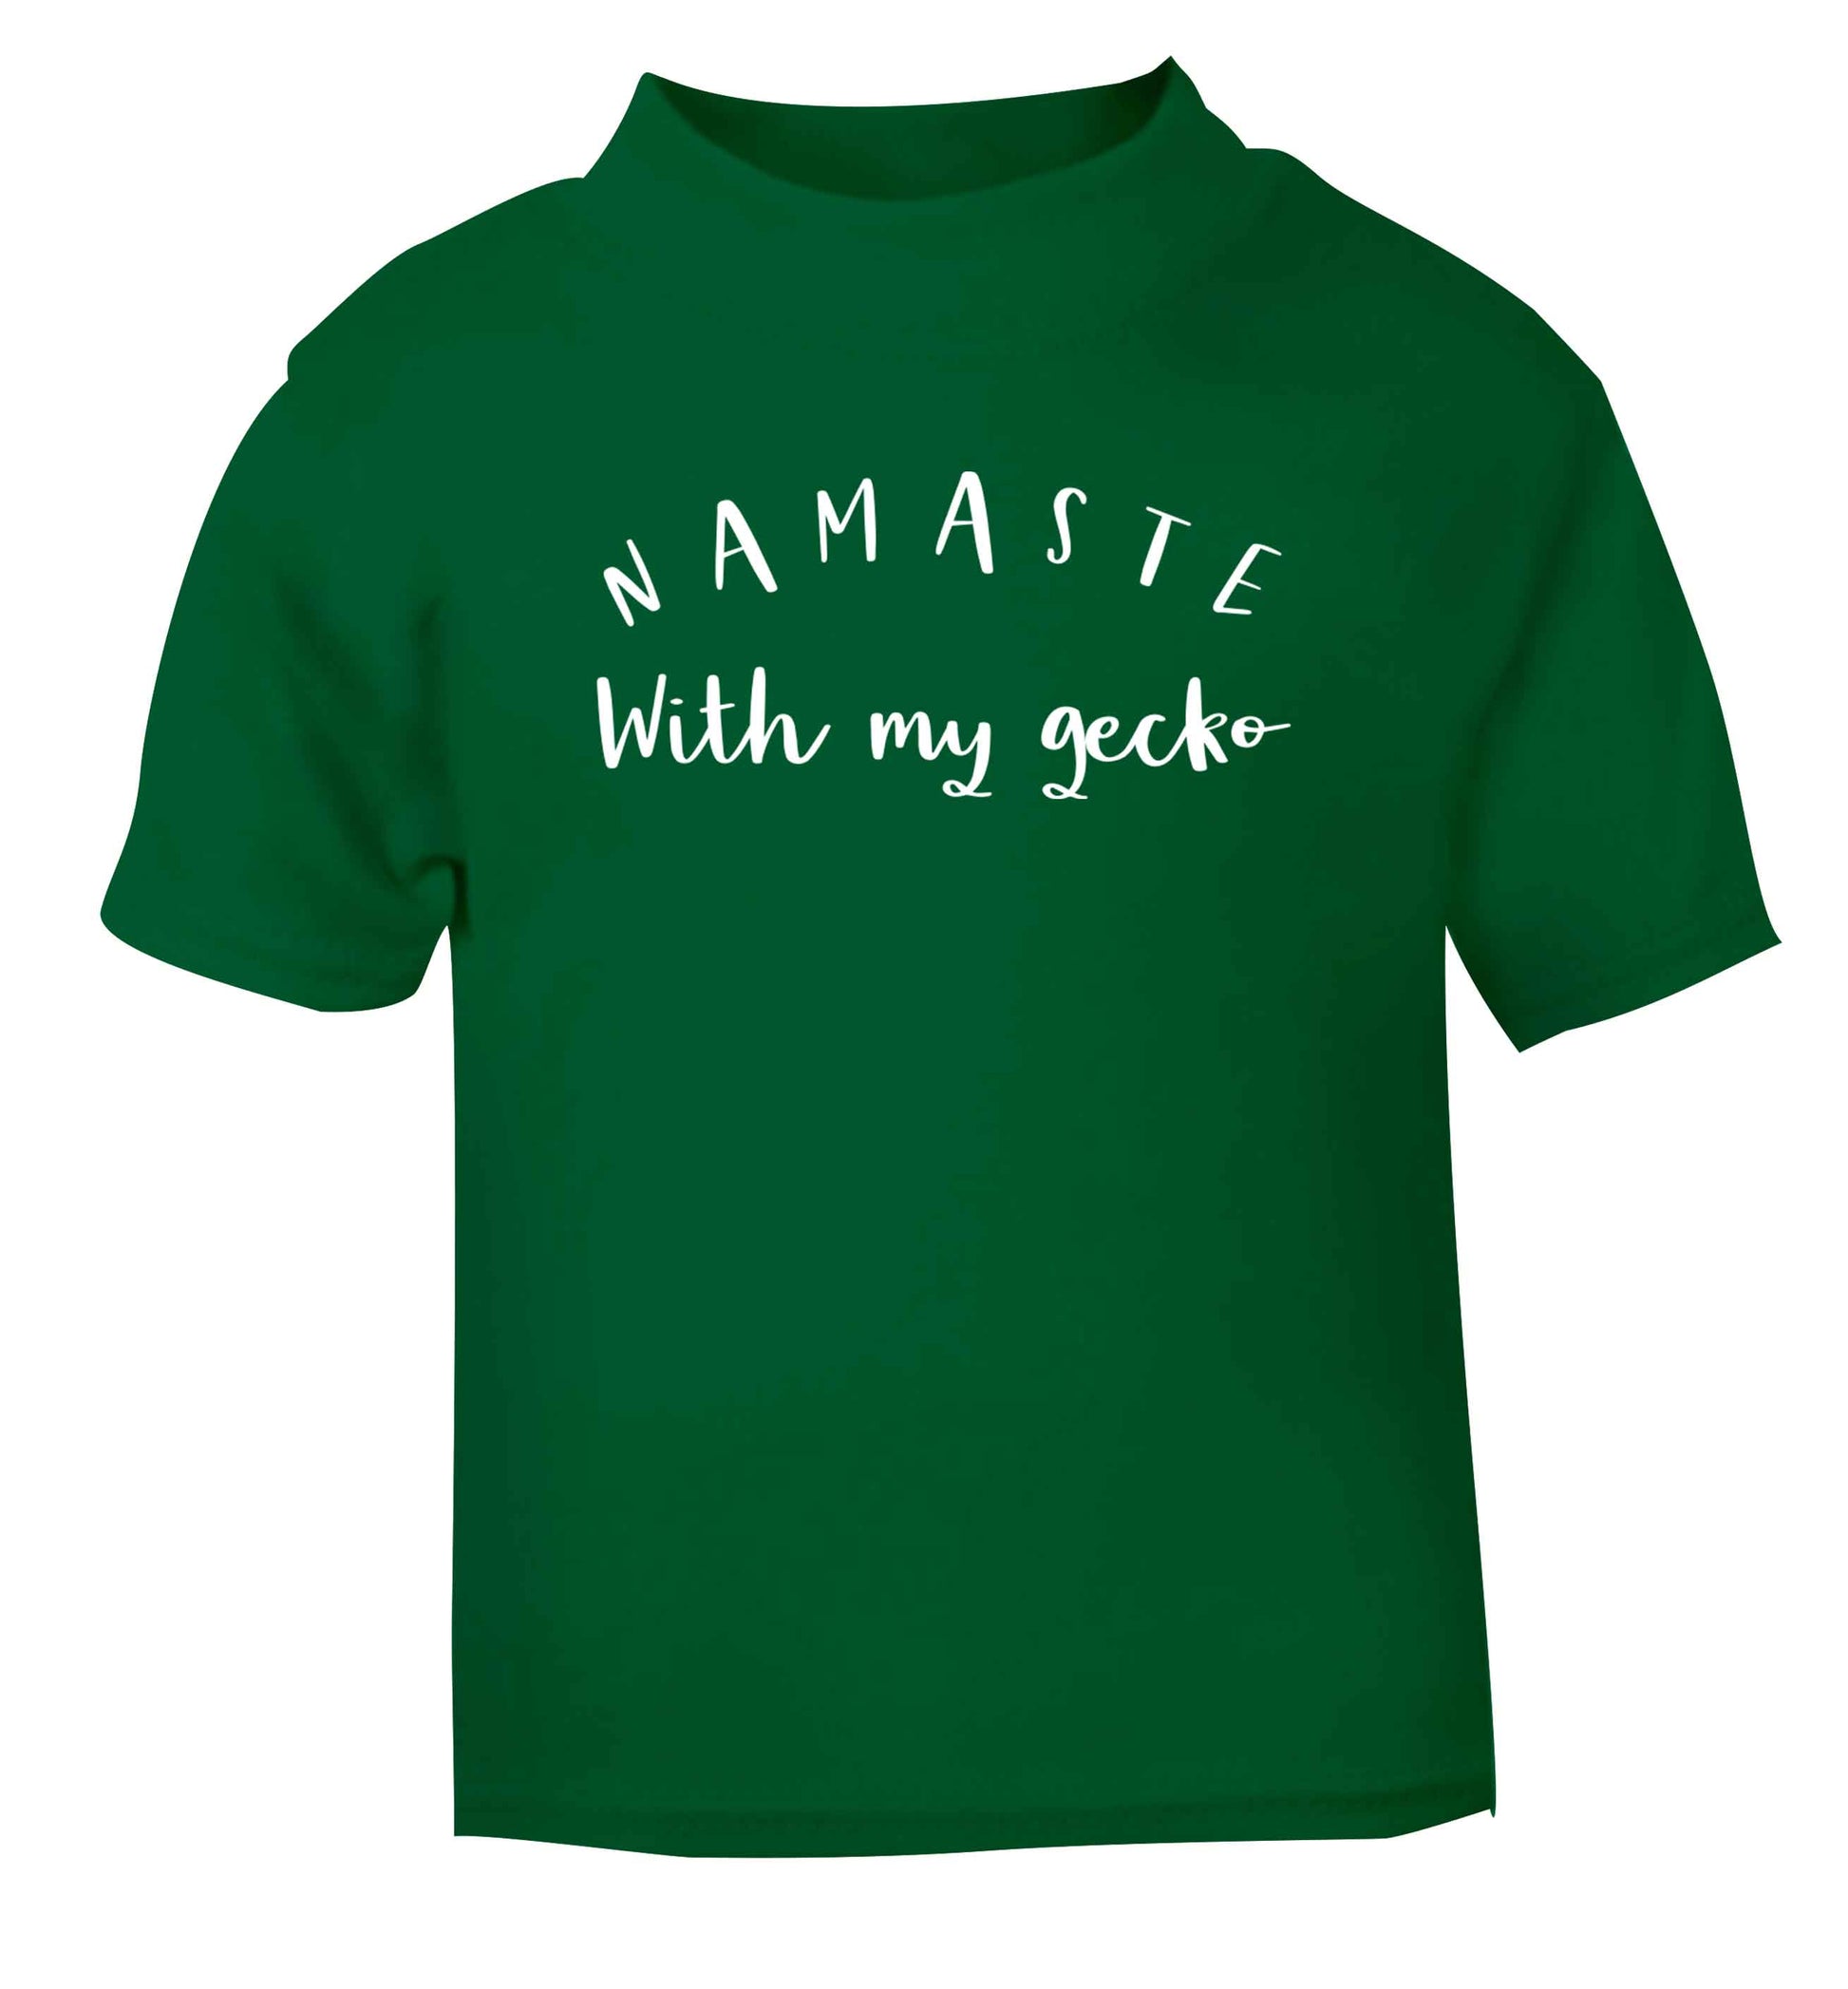 Namaste with my gecko green Baby Toddler Tshirt 2 Years